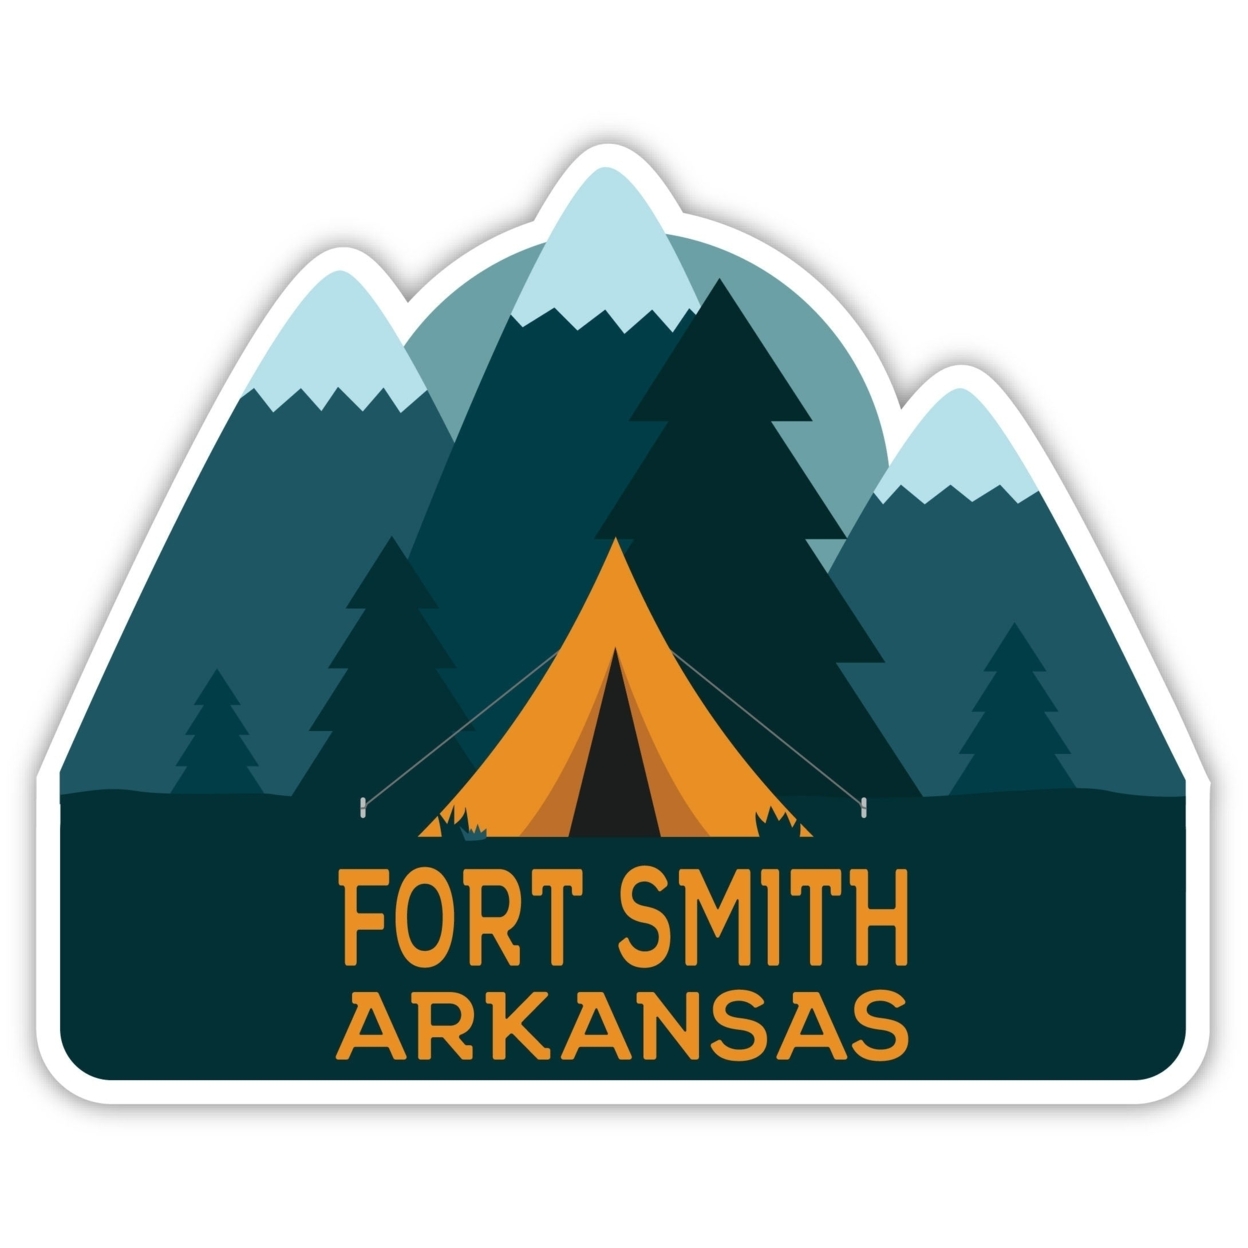 Fort Smith Arkansas Souvenir Decorative Stickers (Choose Theme And Size) - 4-Pack, 2-Inch, Tent